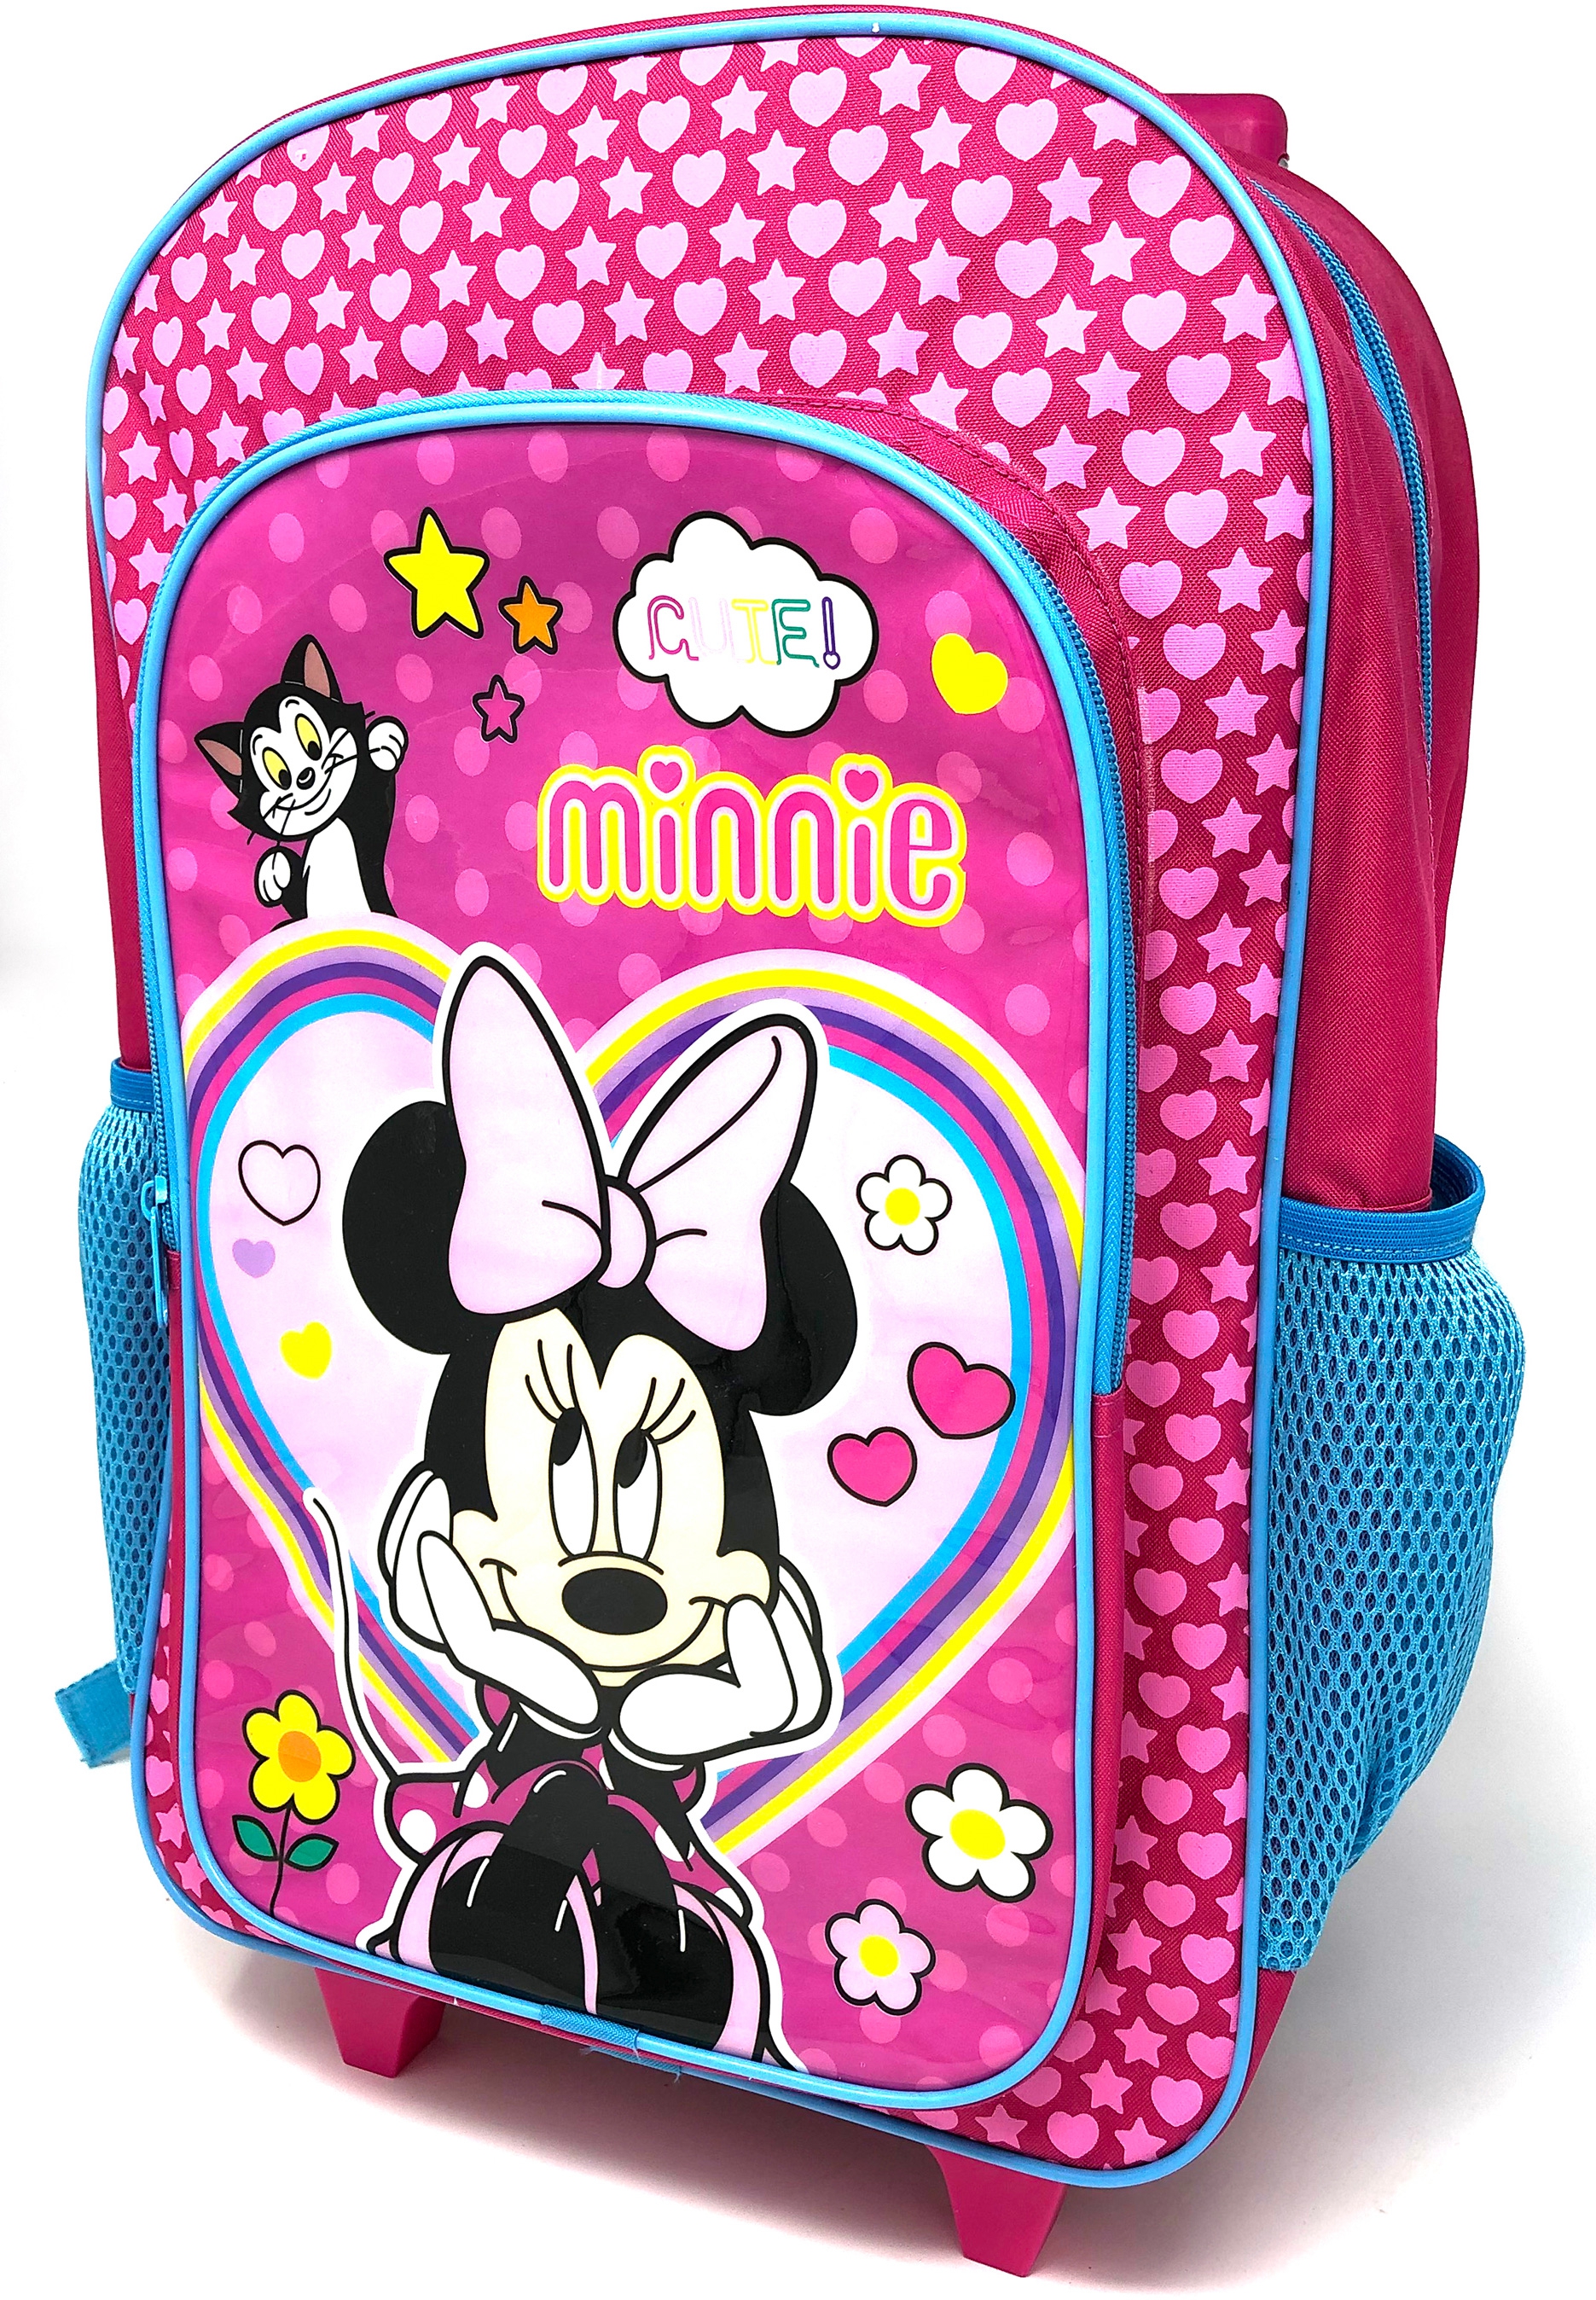 Disney Minnie Mouse Luggage Deluxe School Travel Trolley Roller Wheeled Bag